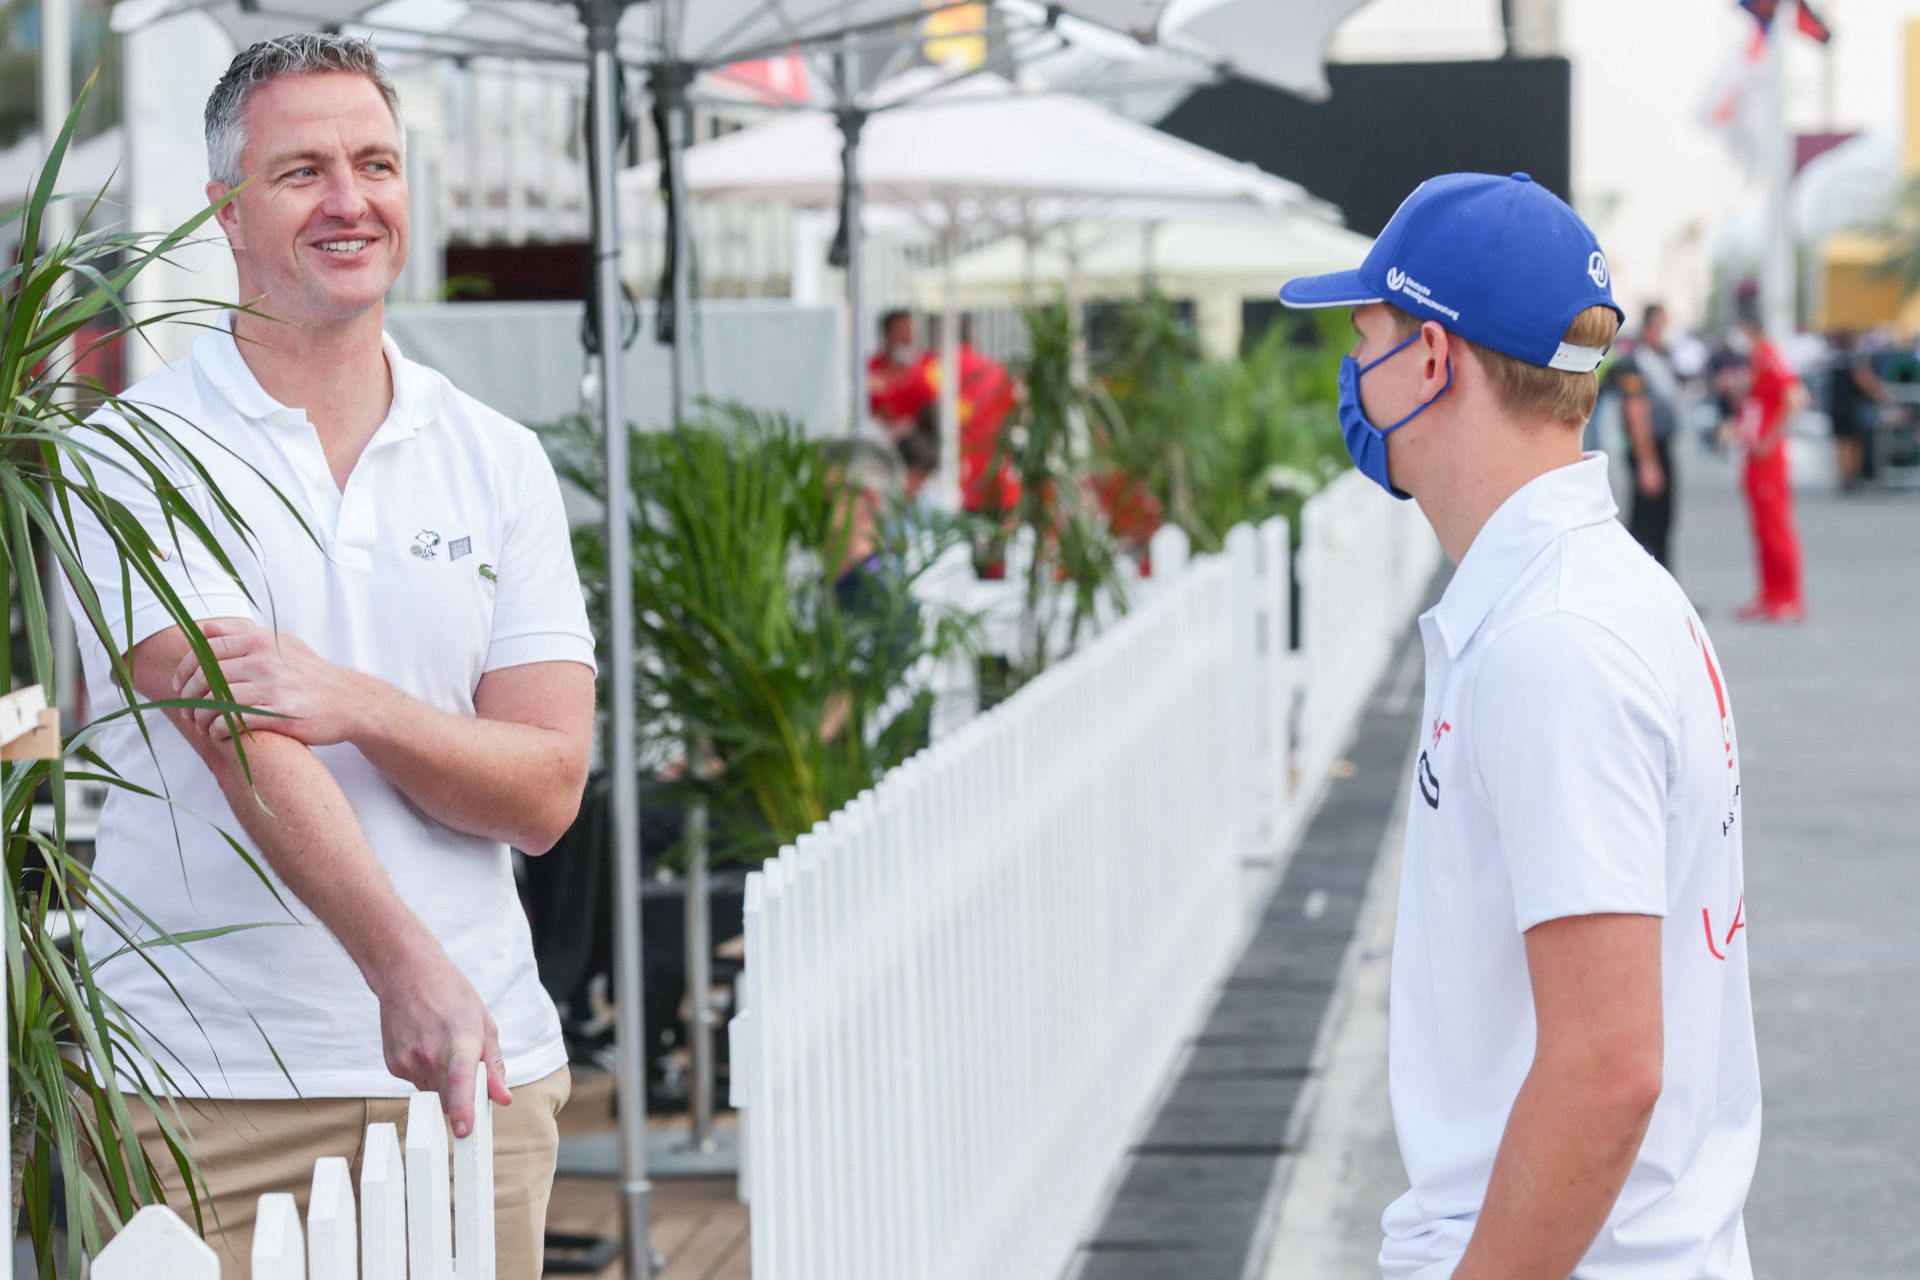 Ralf Schumacher chats with Mick Schumacher in Doha, Qatar (Photo by Peter Fox/Getty Images)